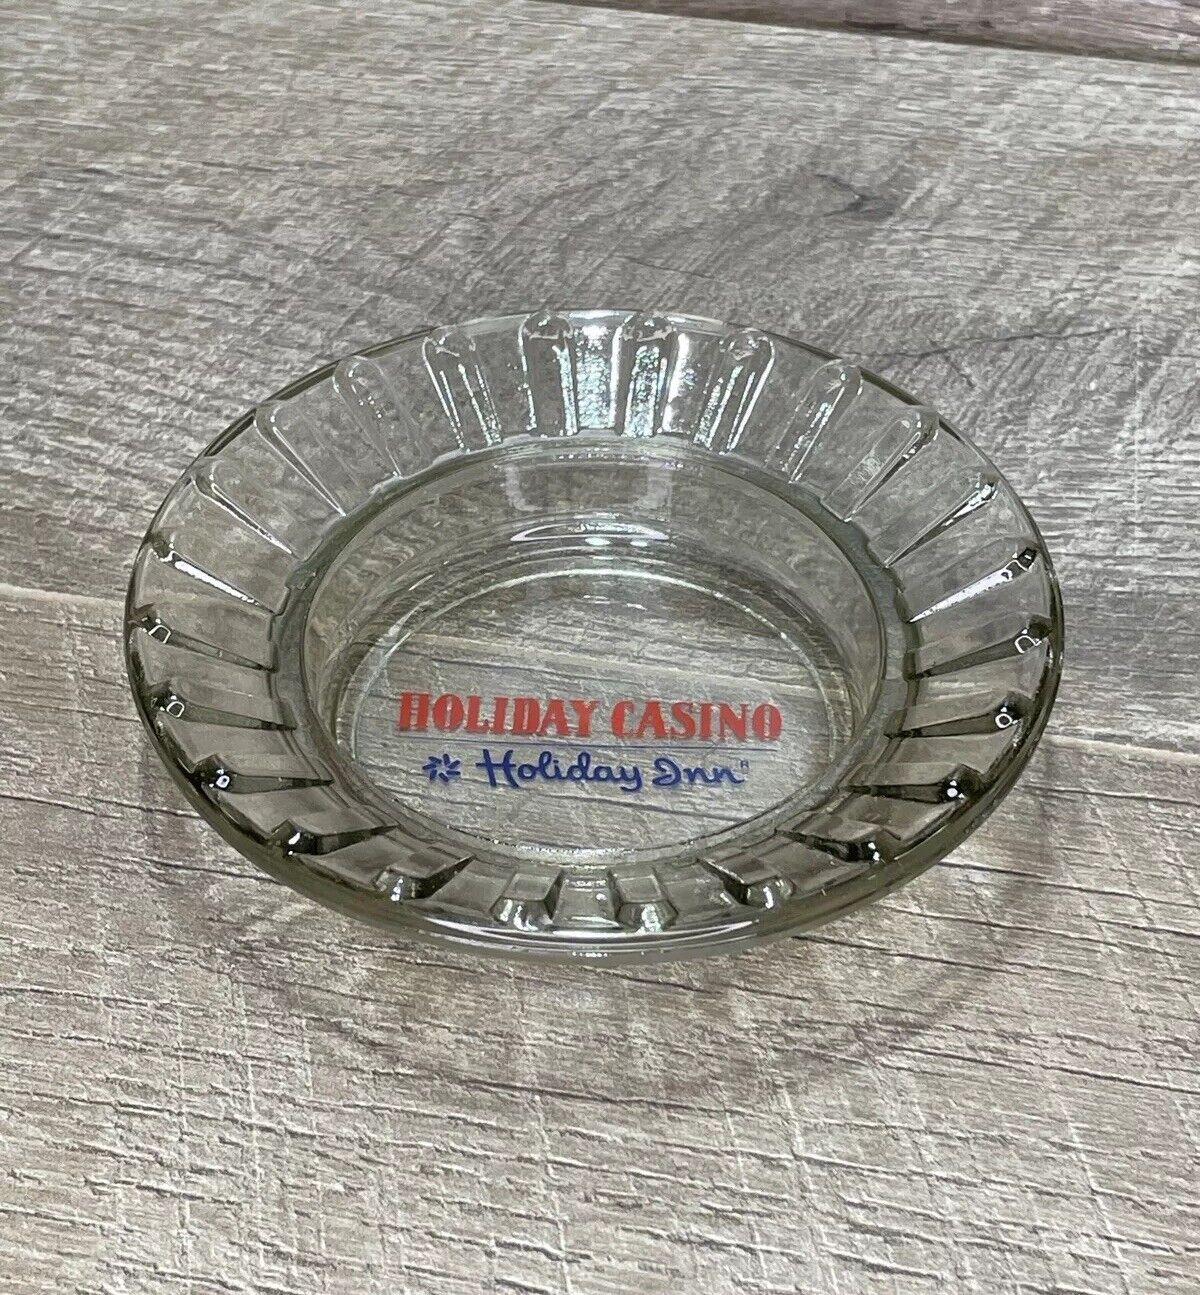 Holiday Casino Holiday Inn Vintage Ashtray Clear Round Red & Blue Letter